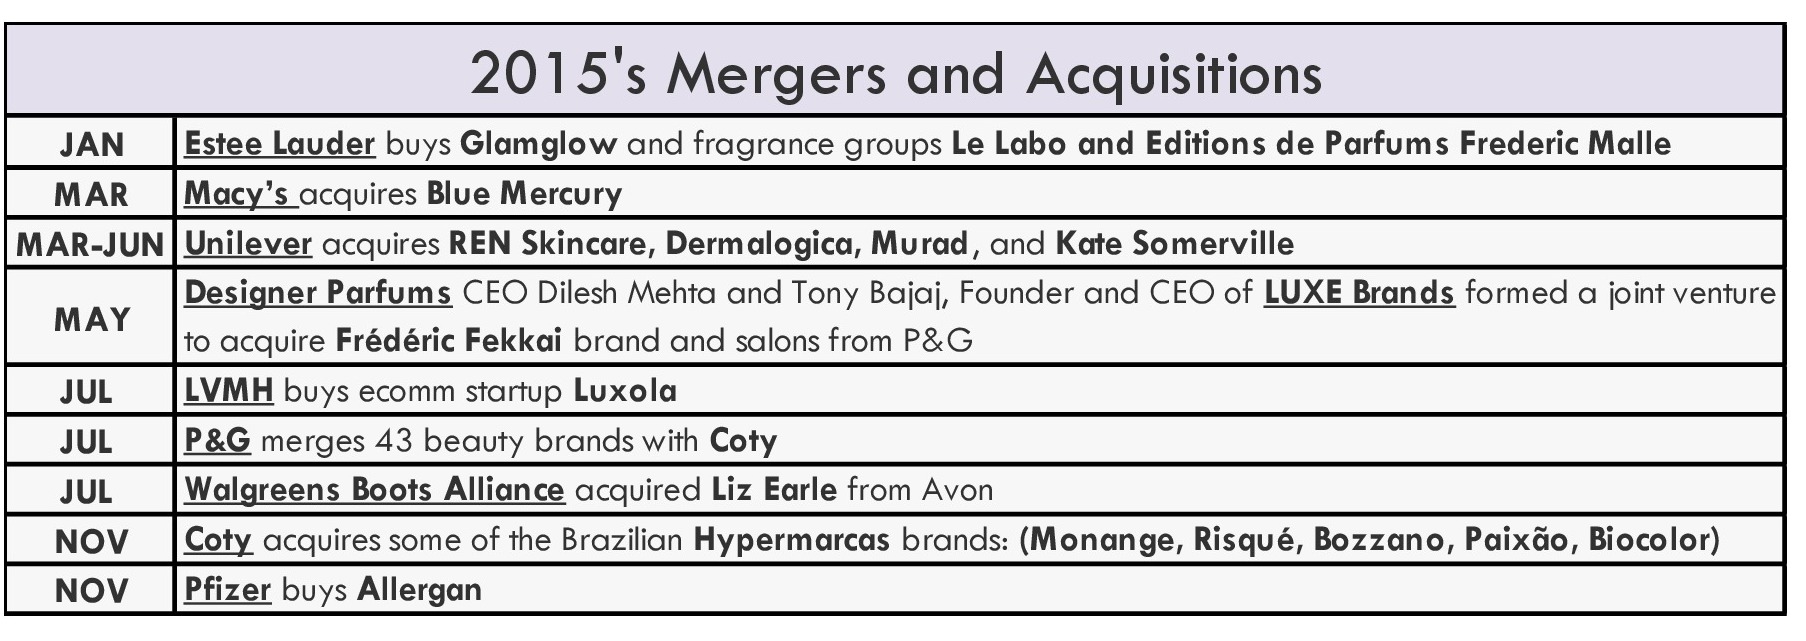 2015 Mergers and Acquisitions